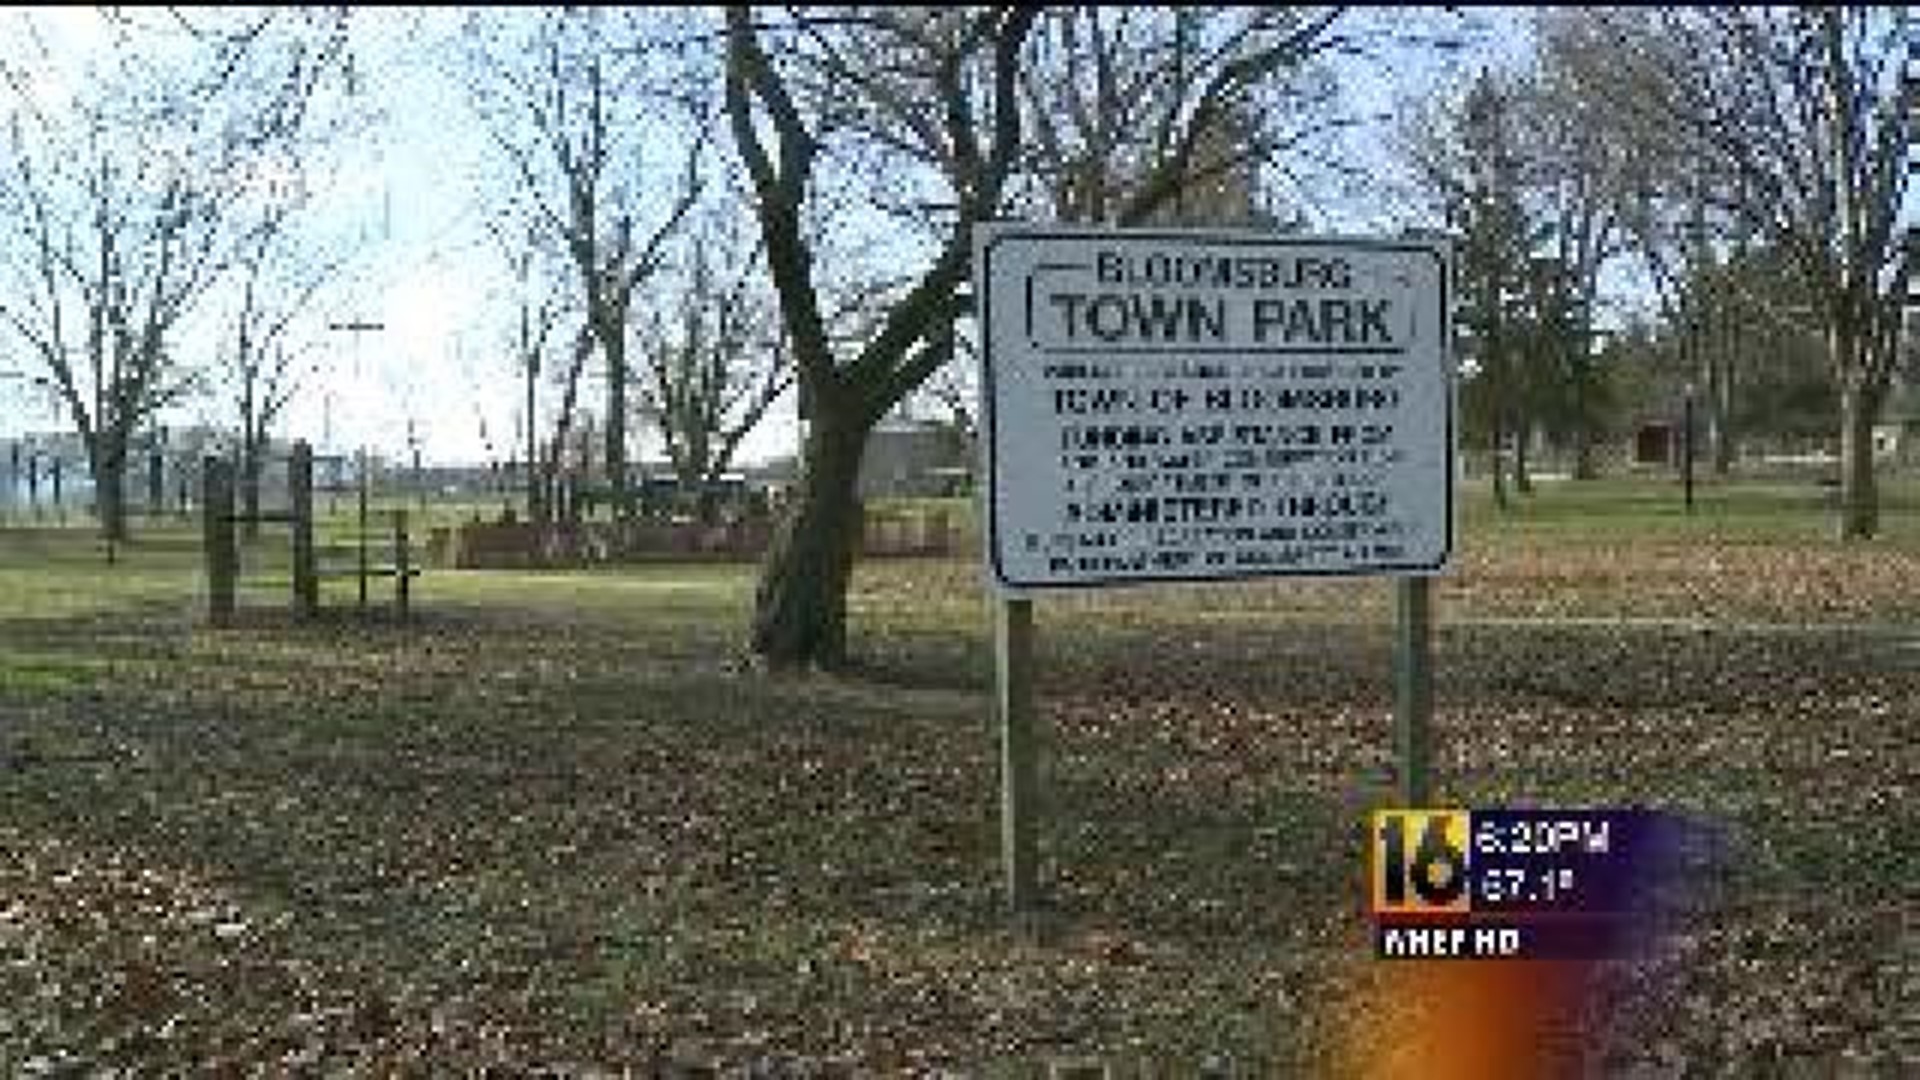 Local Business Donates Money to Playground Project